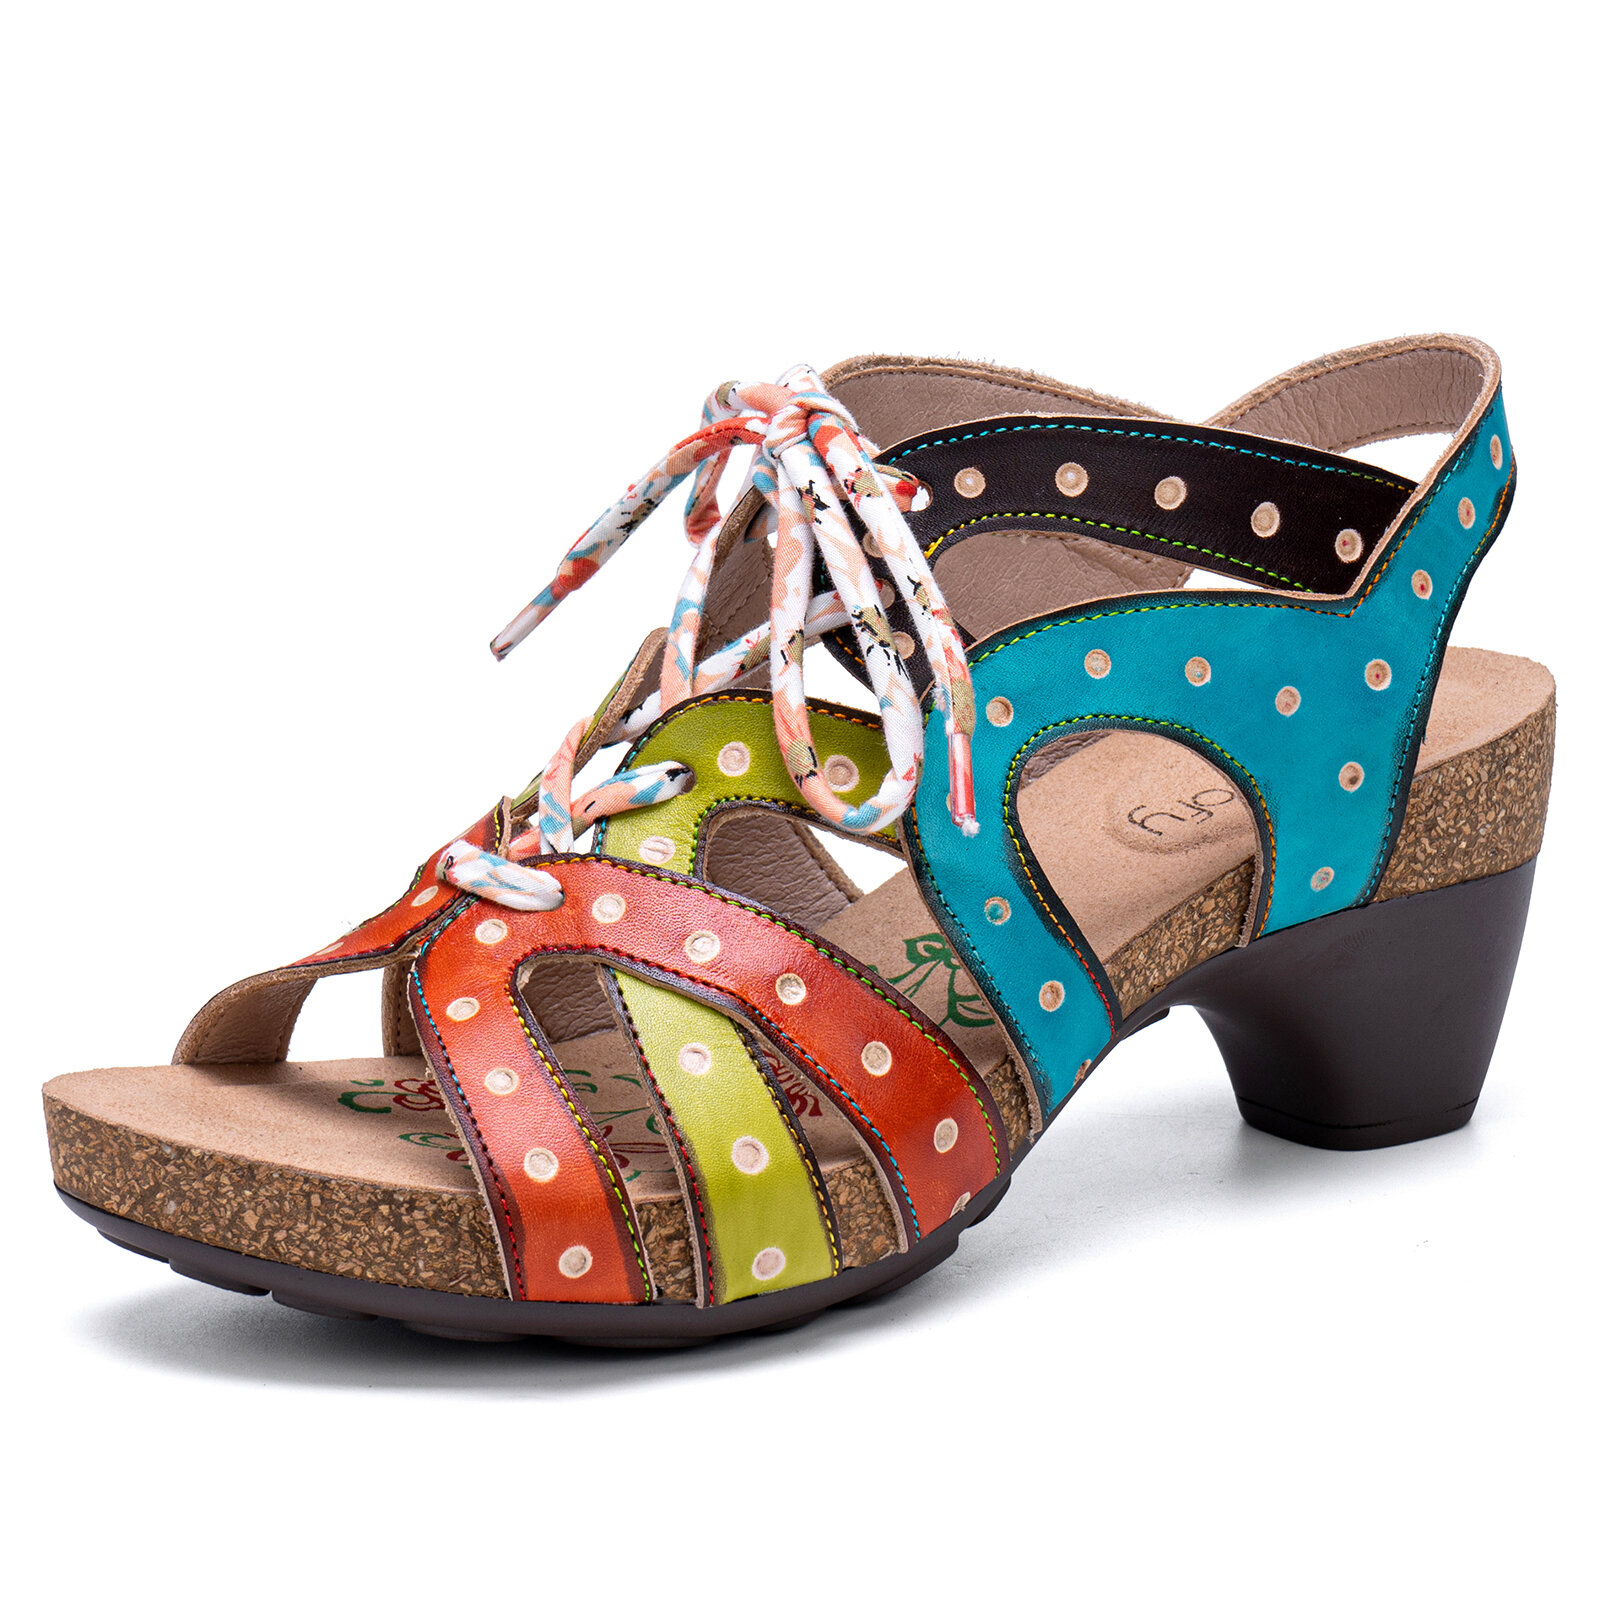 

Socofy Genuine Leather Casual Bohemian Ethnic Colorblock Comfy Lace-up Heeled Sandals